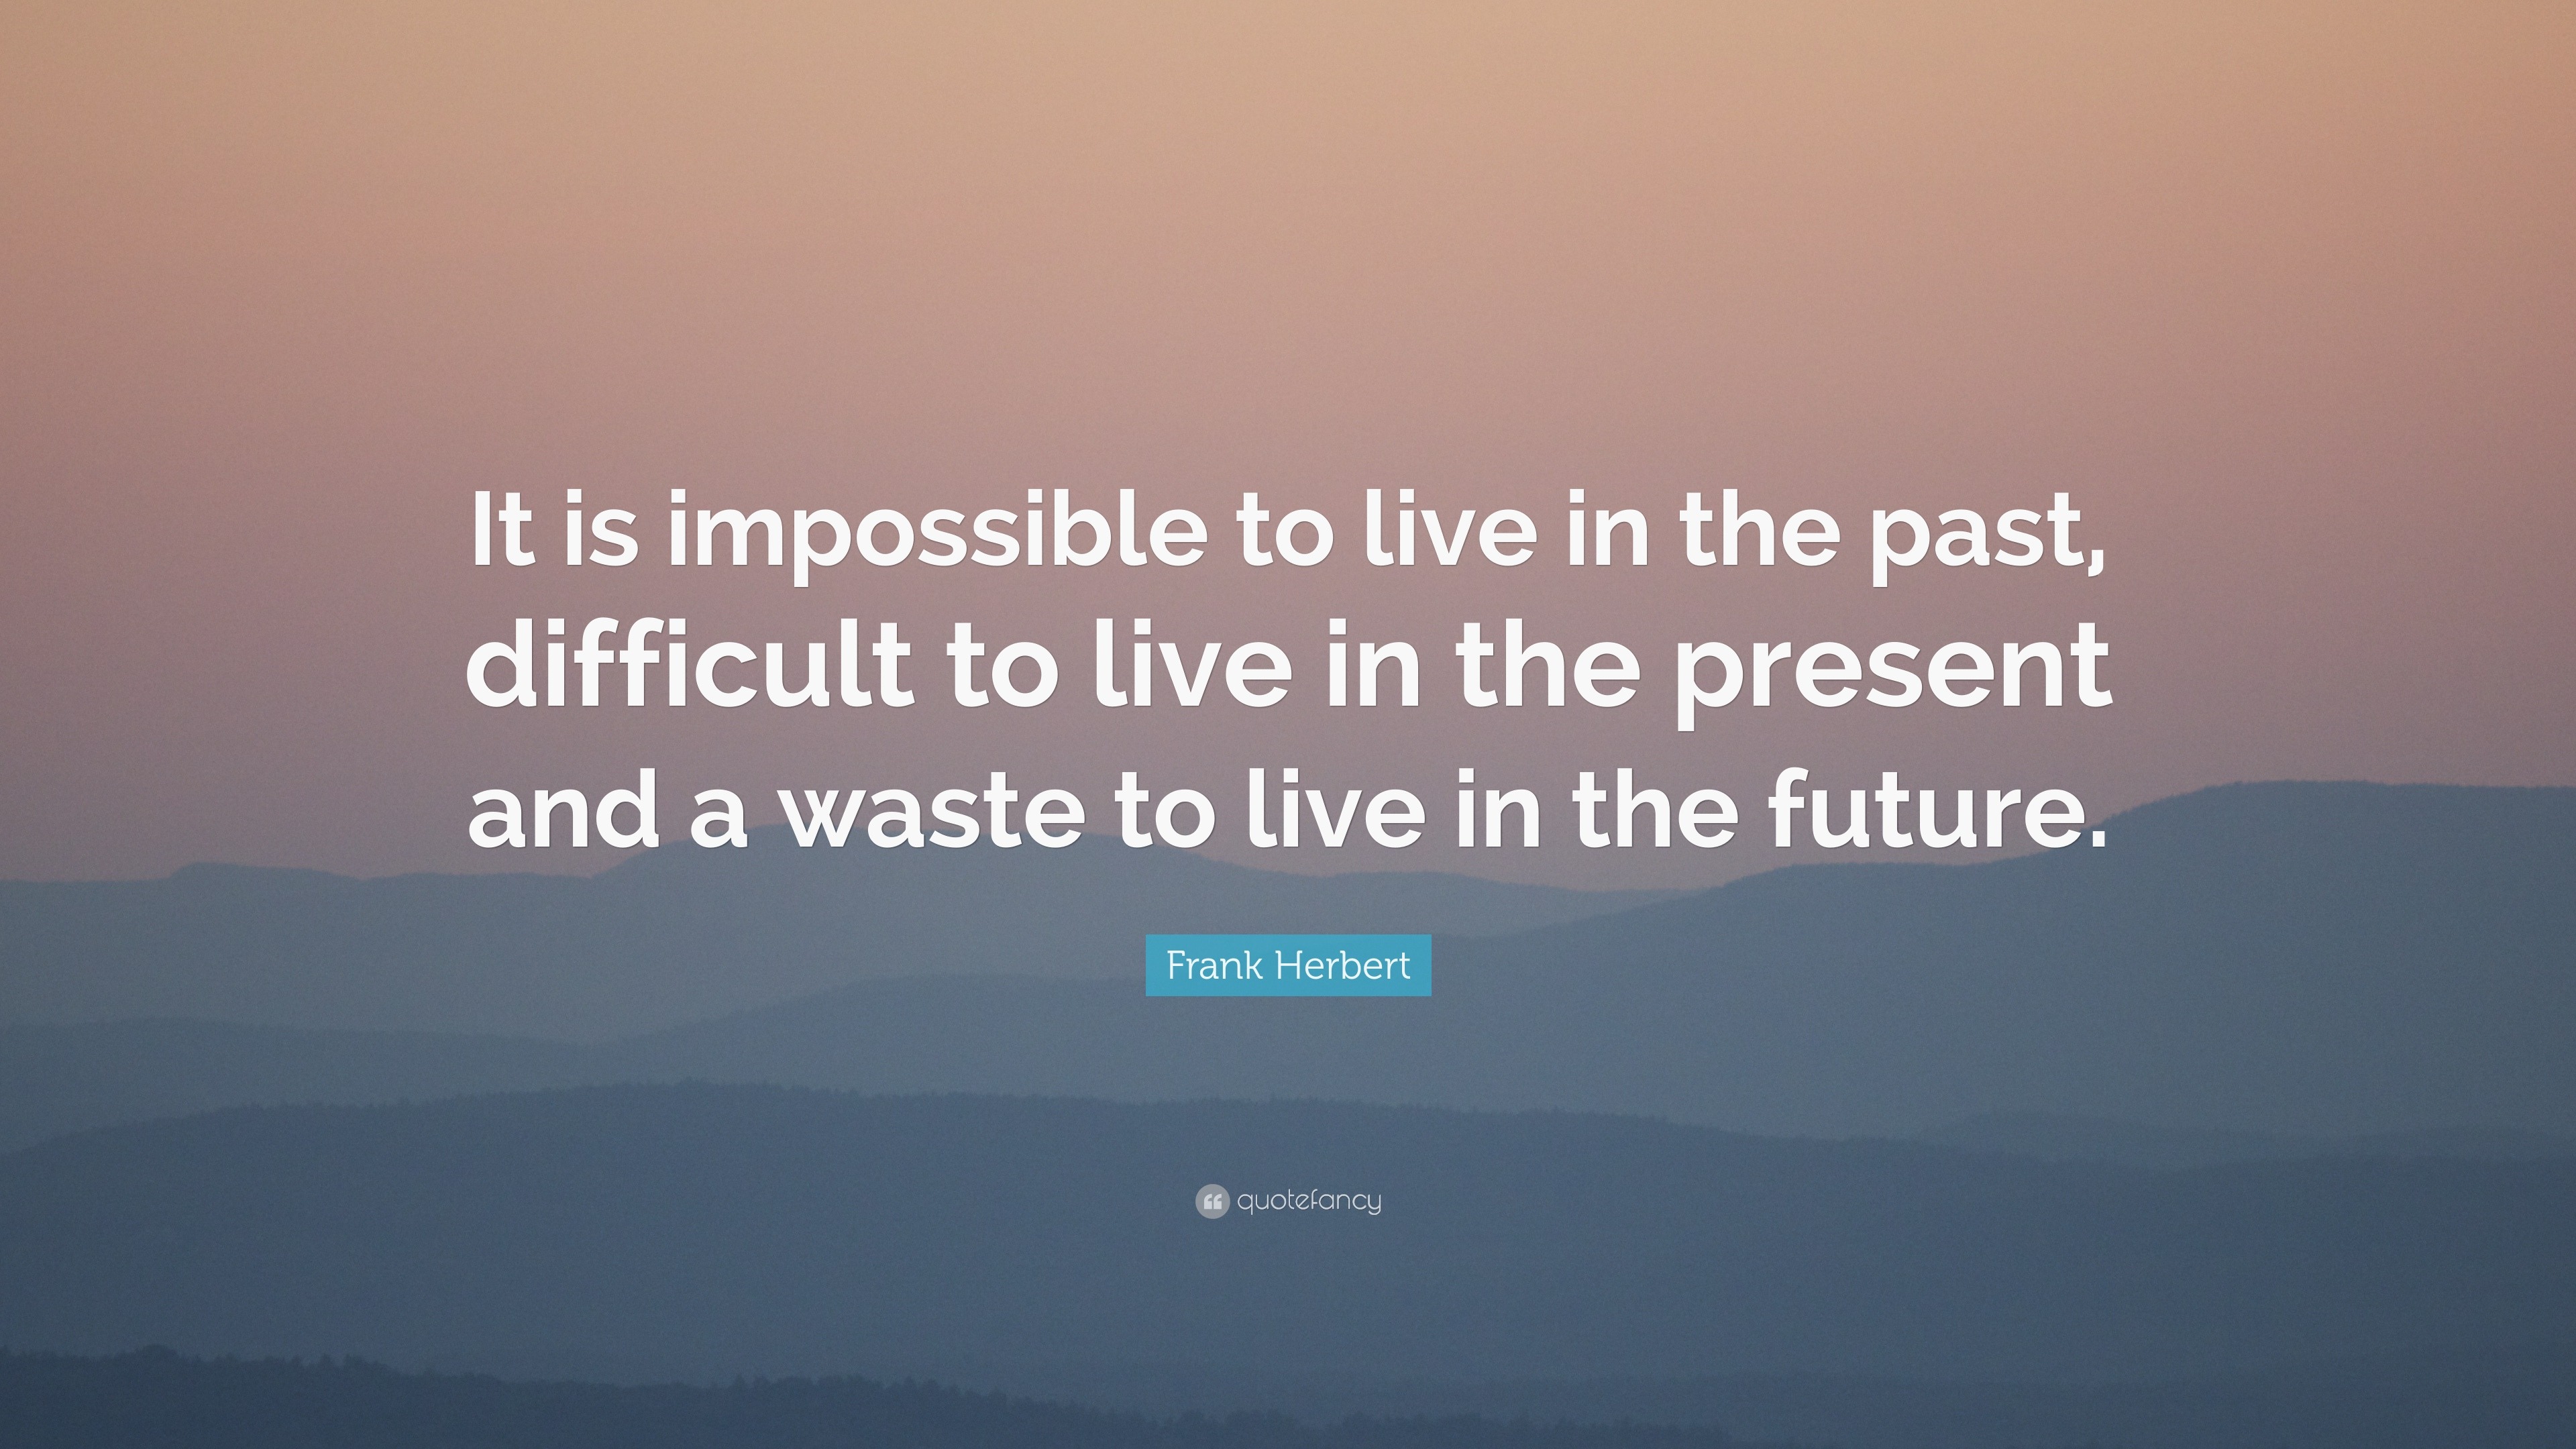 Frank Herbert Quote: “It is impossible to live in the past, difficult ...